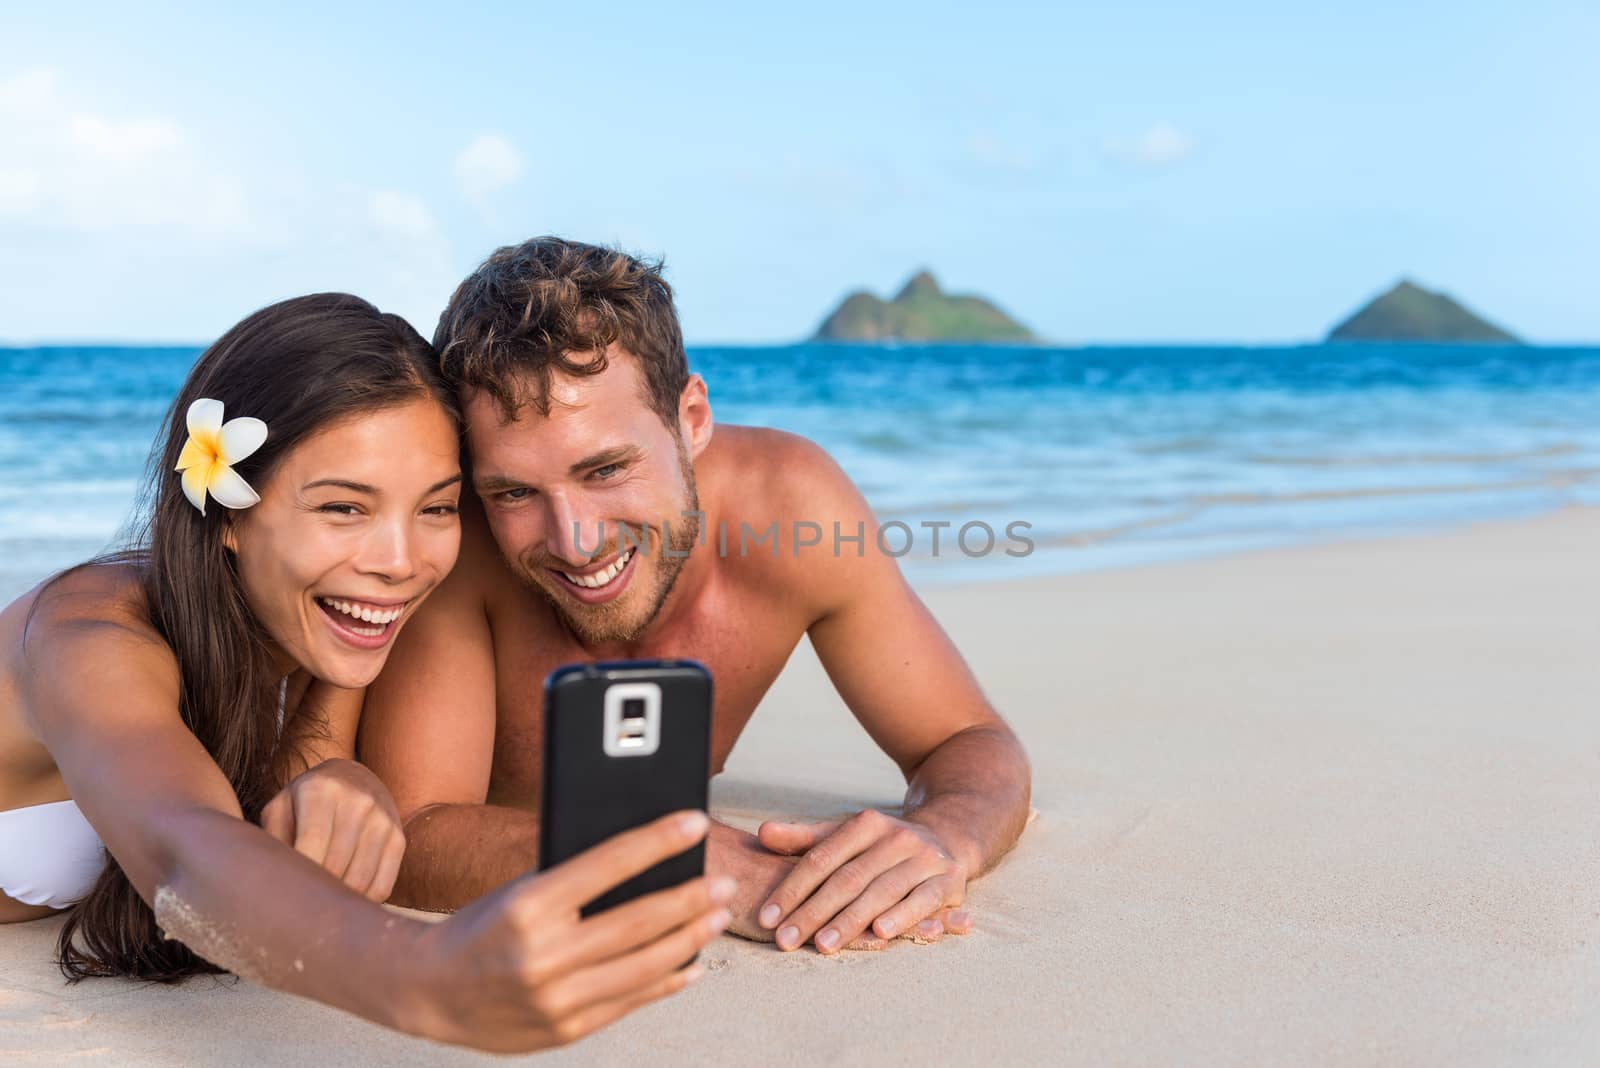 Beach vacation couple taking fun phone selfie on Hawaii vacation. Asian girl Caucasian man relaxing on Lanikai beach, Oahu, on summer holidays using smartphone for pictures together by Maridav